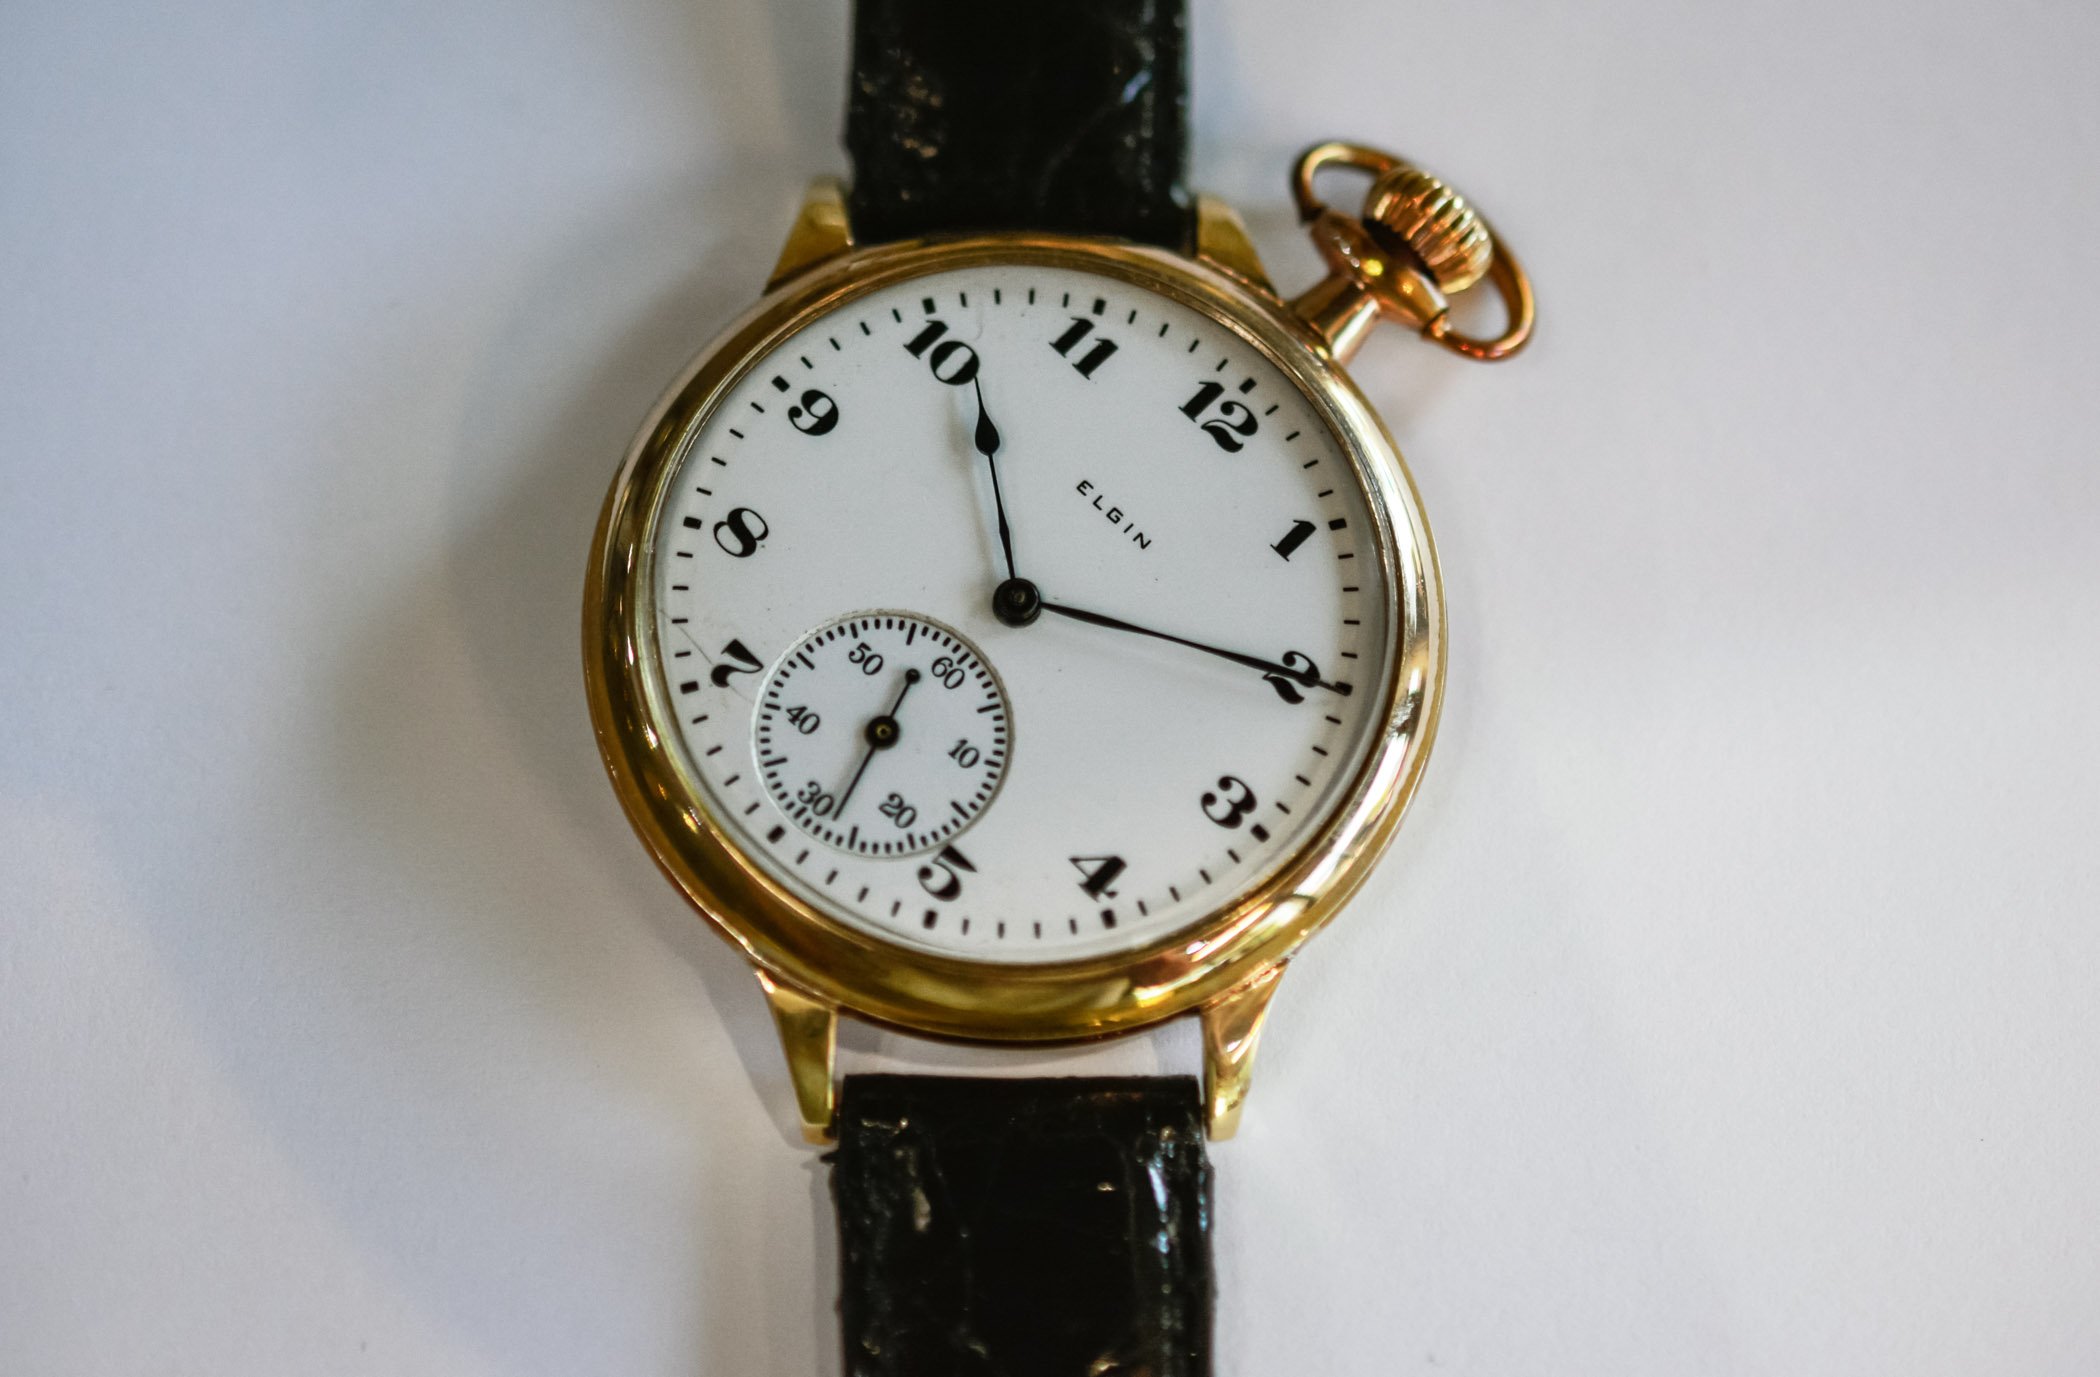 Merging of Pocket Watches and Wristwatches Conversions Design Influences Hybrids